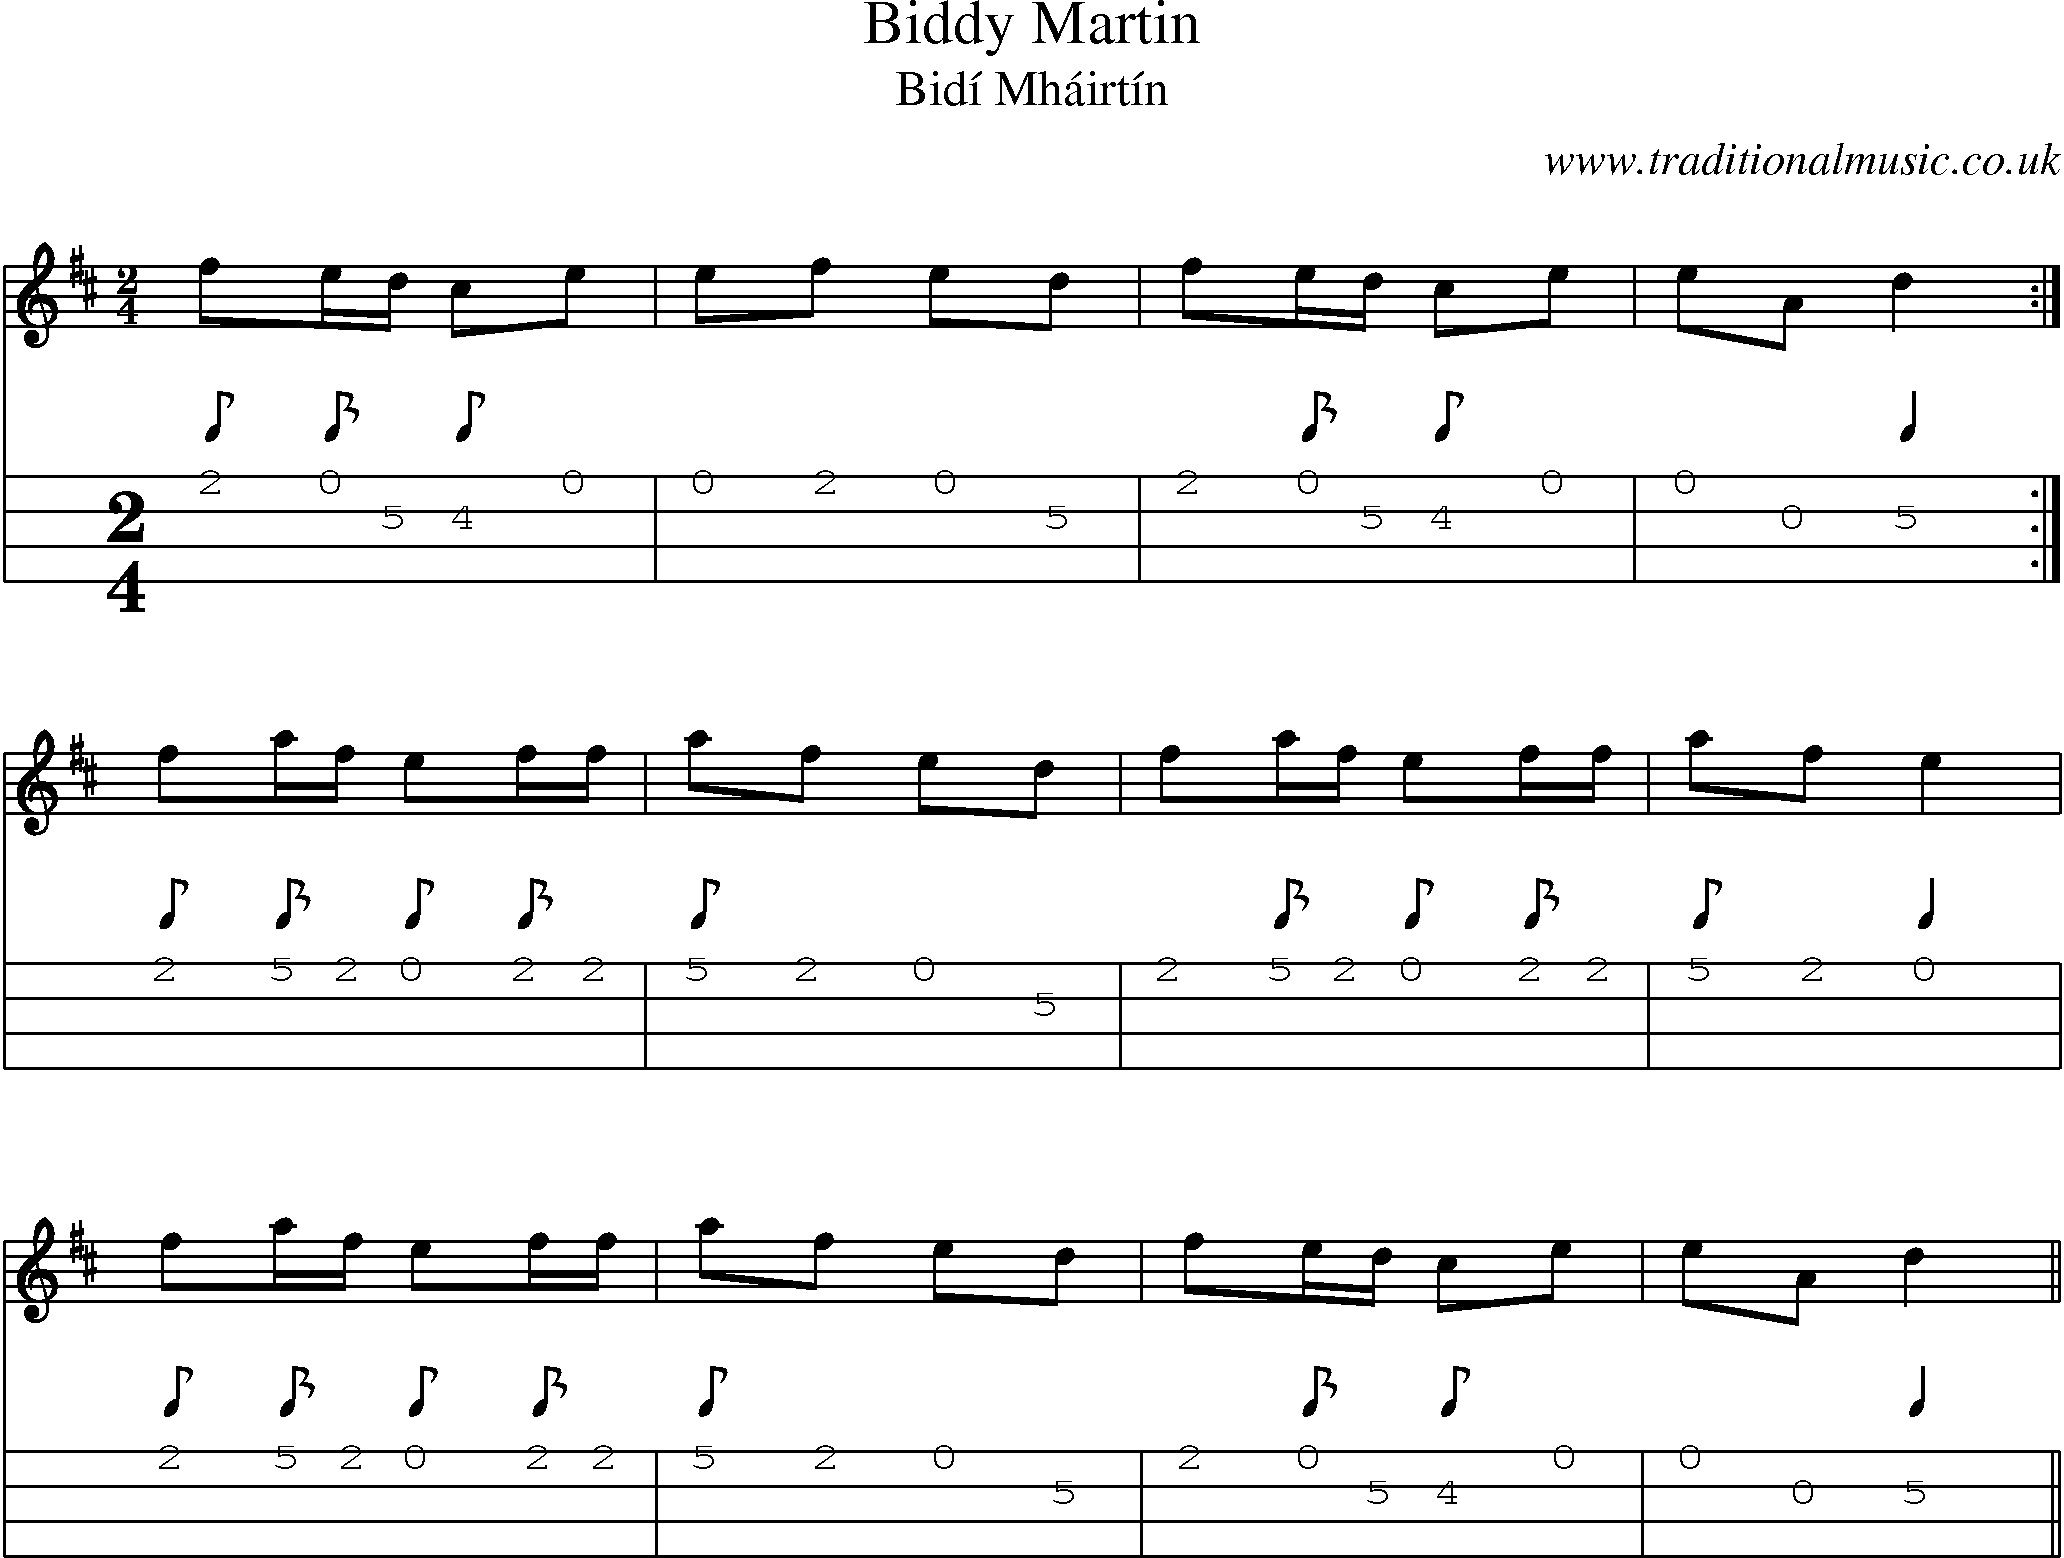 Music Score and Mandolin Tabs for Biddy Martin